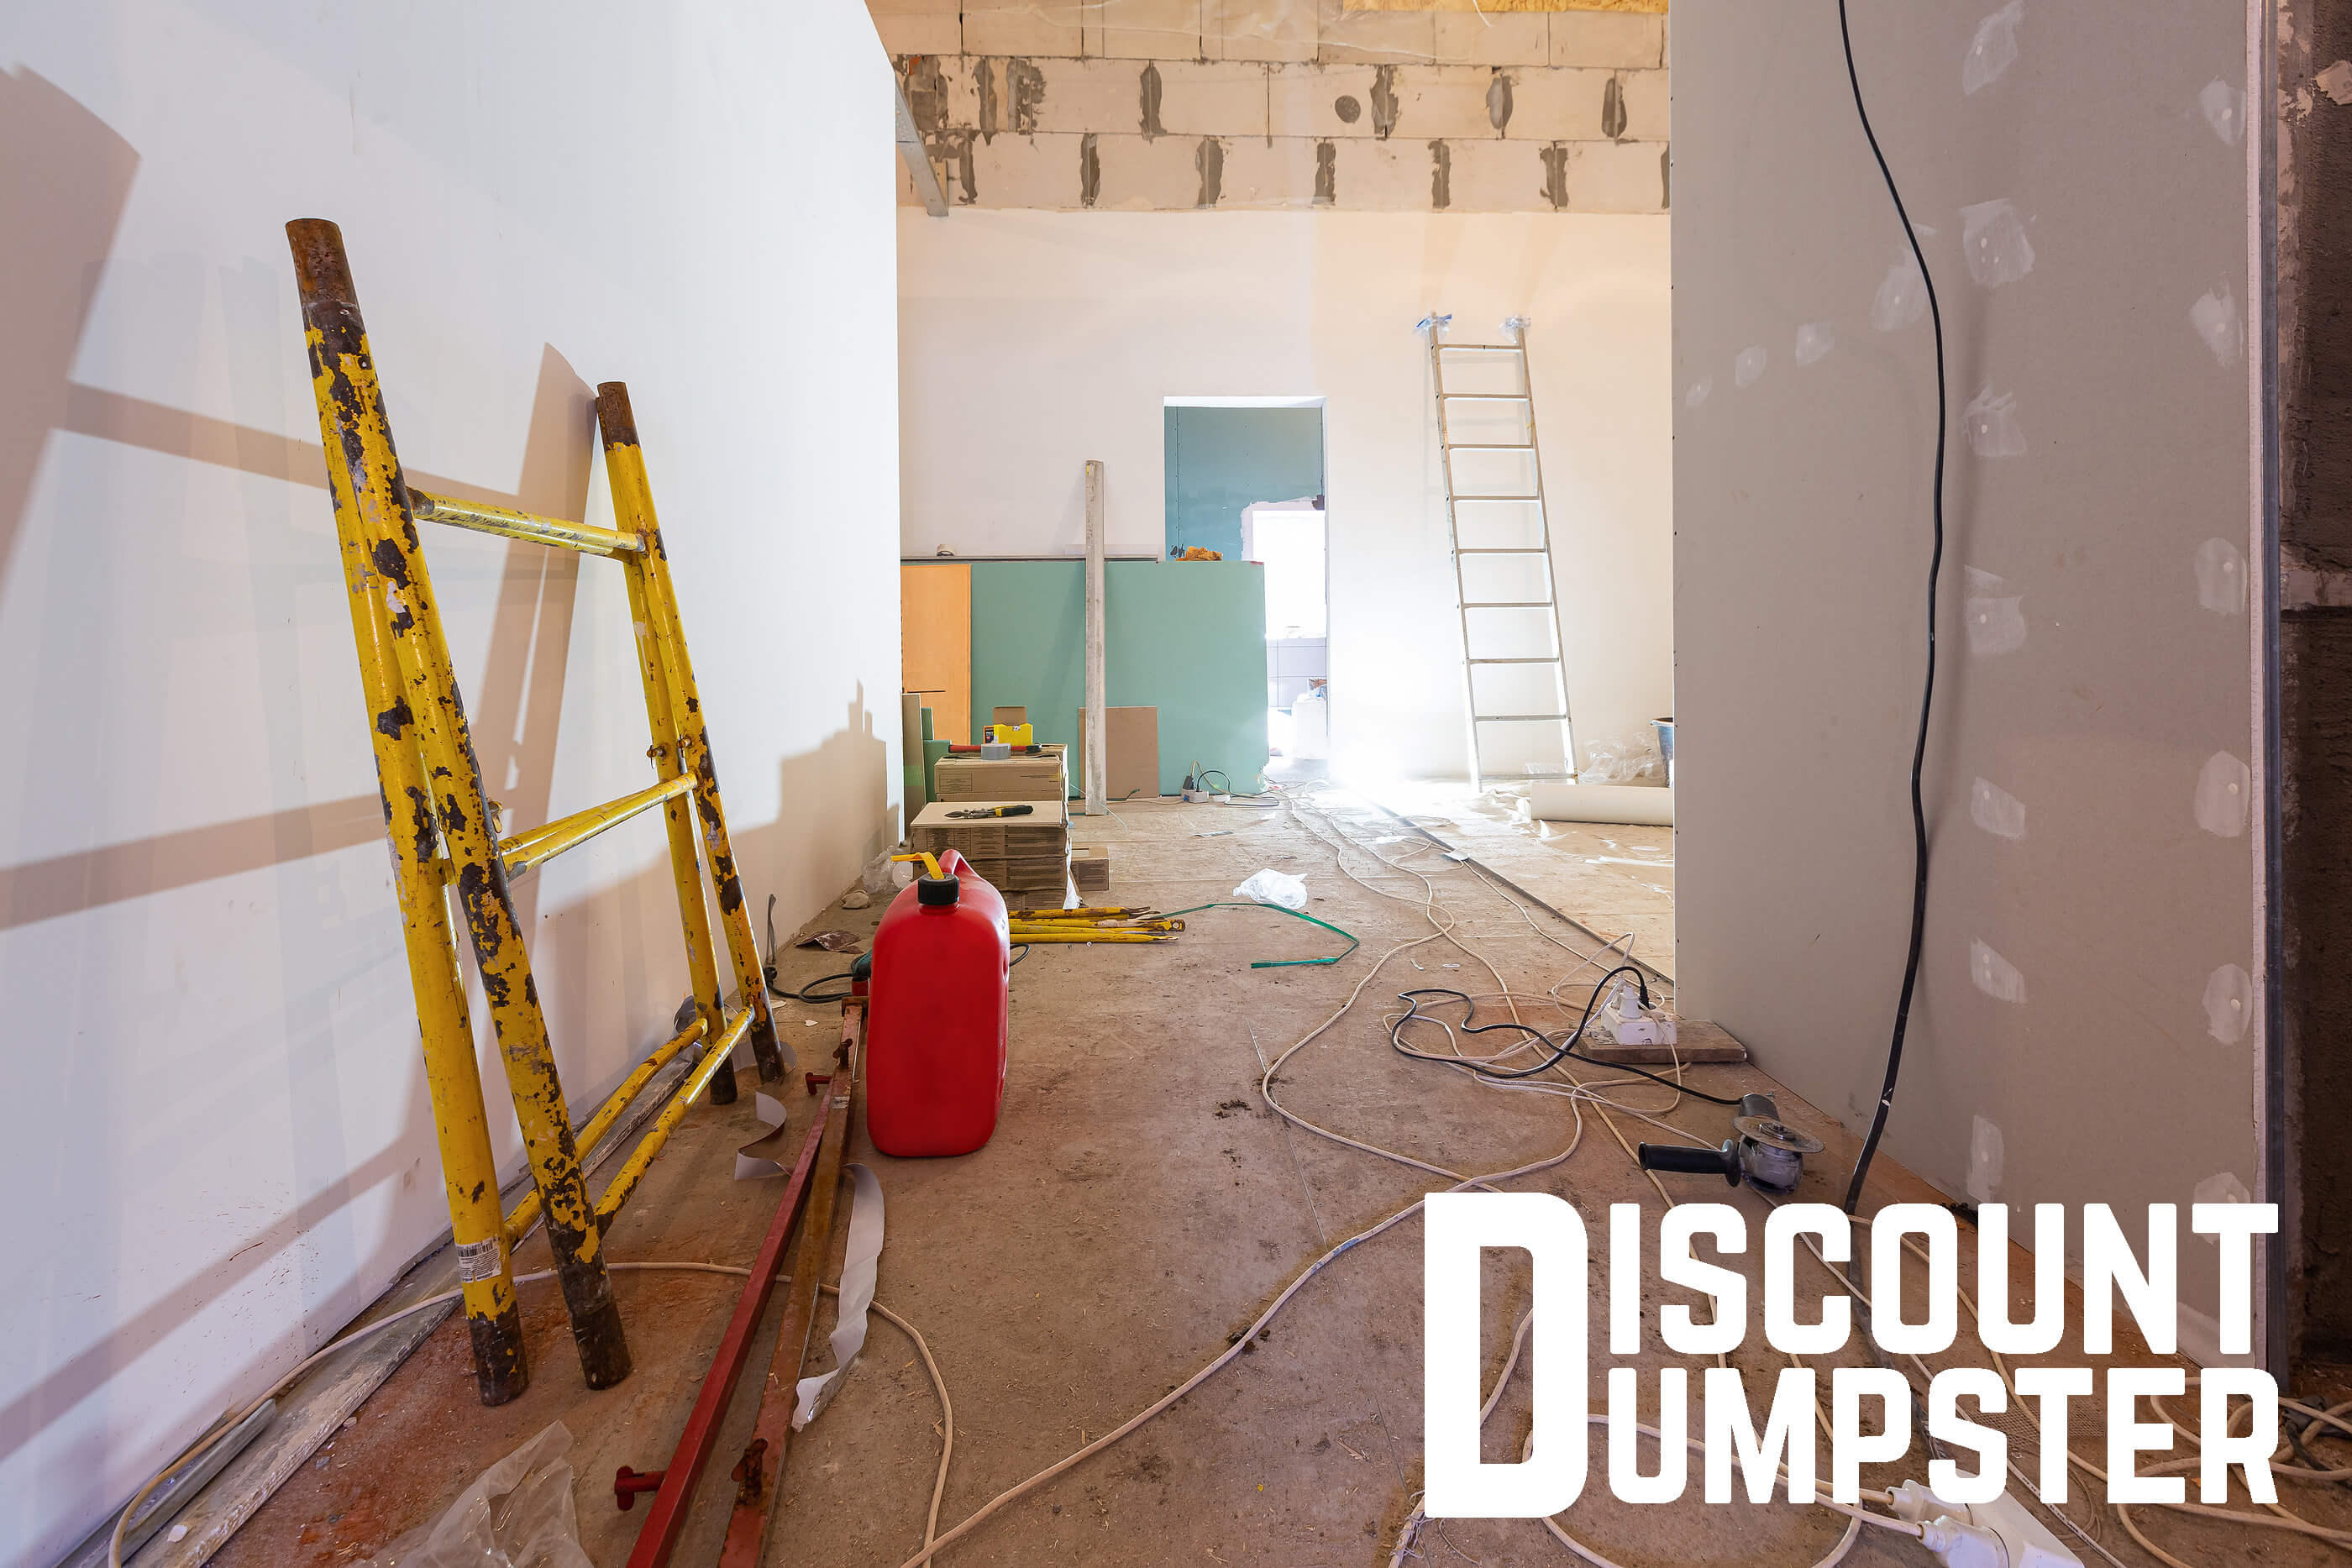 Discount dumpster in Chicago il can help you clear out the waste at your home renovation project Discount Dumpster Chicago (312)549-9198